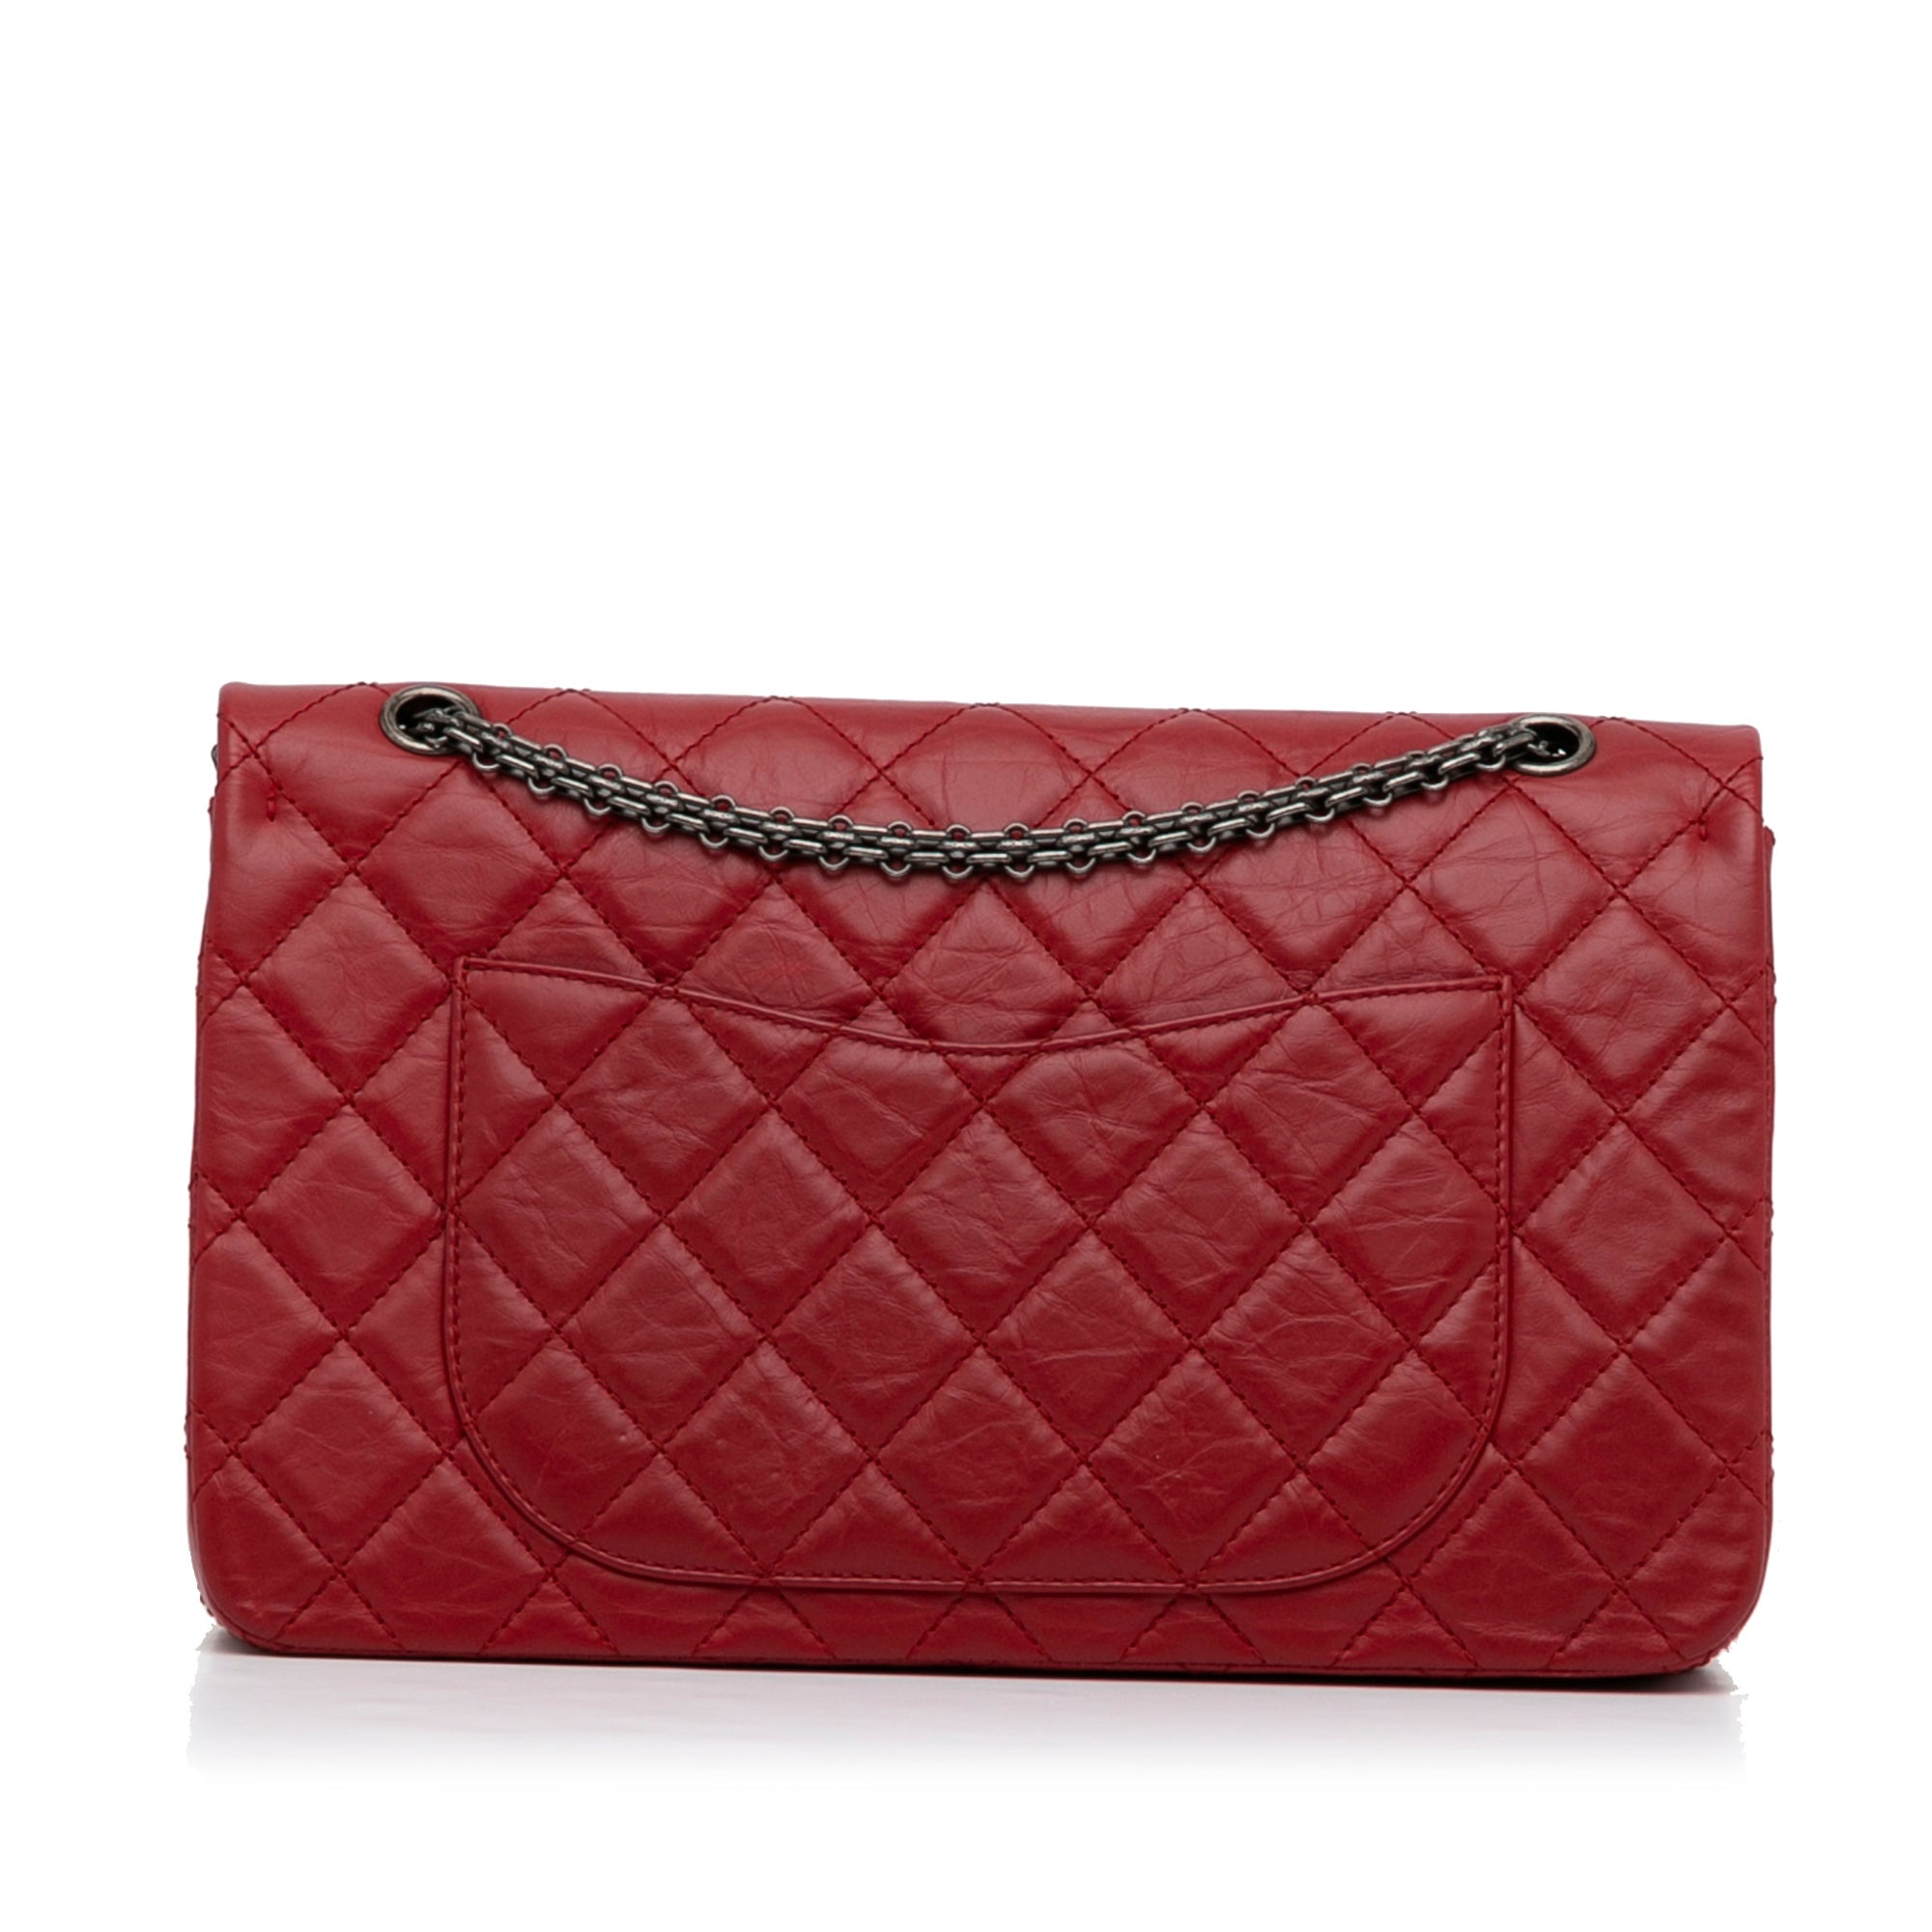 Red Chanel Reissue 2.55 Aged Calfskin Double Flap 227 Shoulder Bag, RvceShops Revival